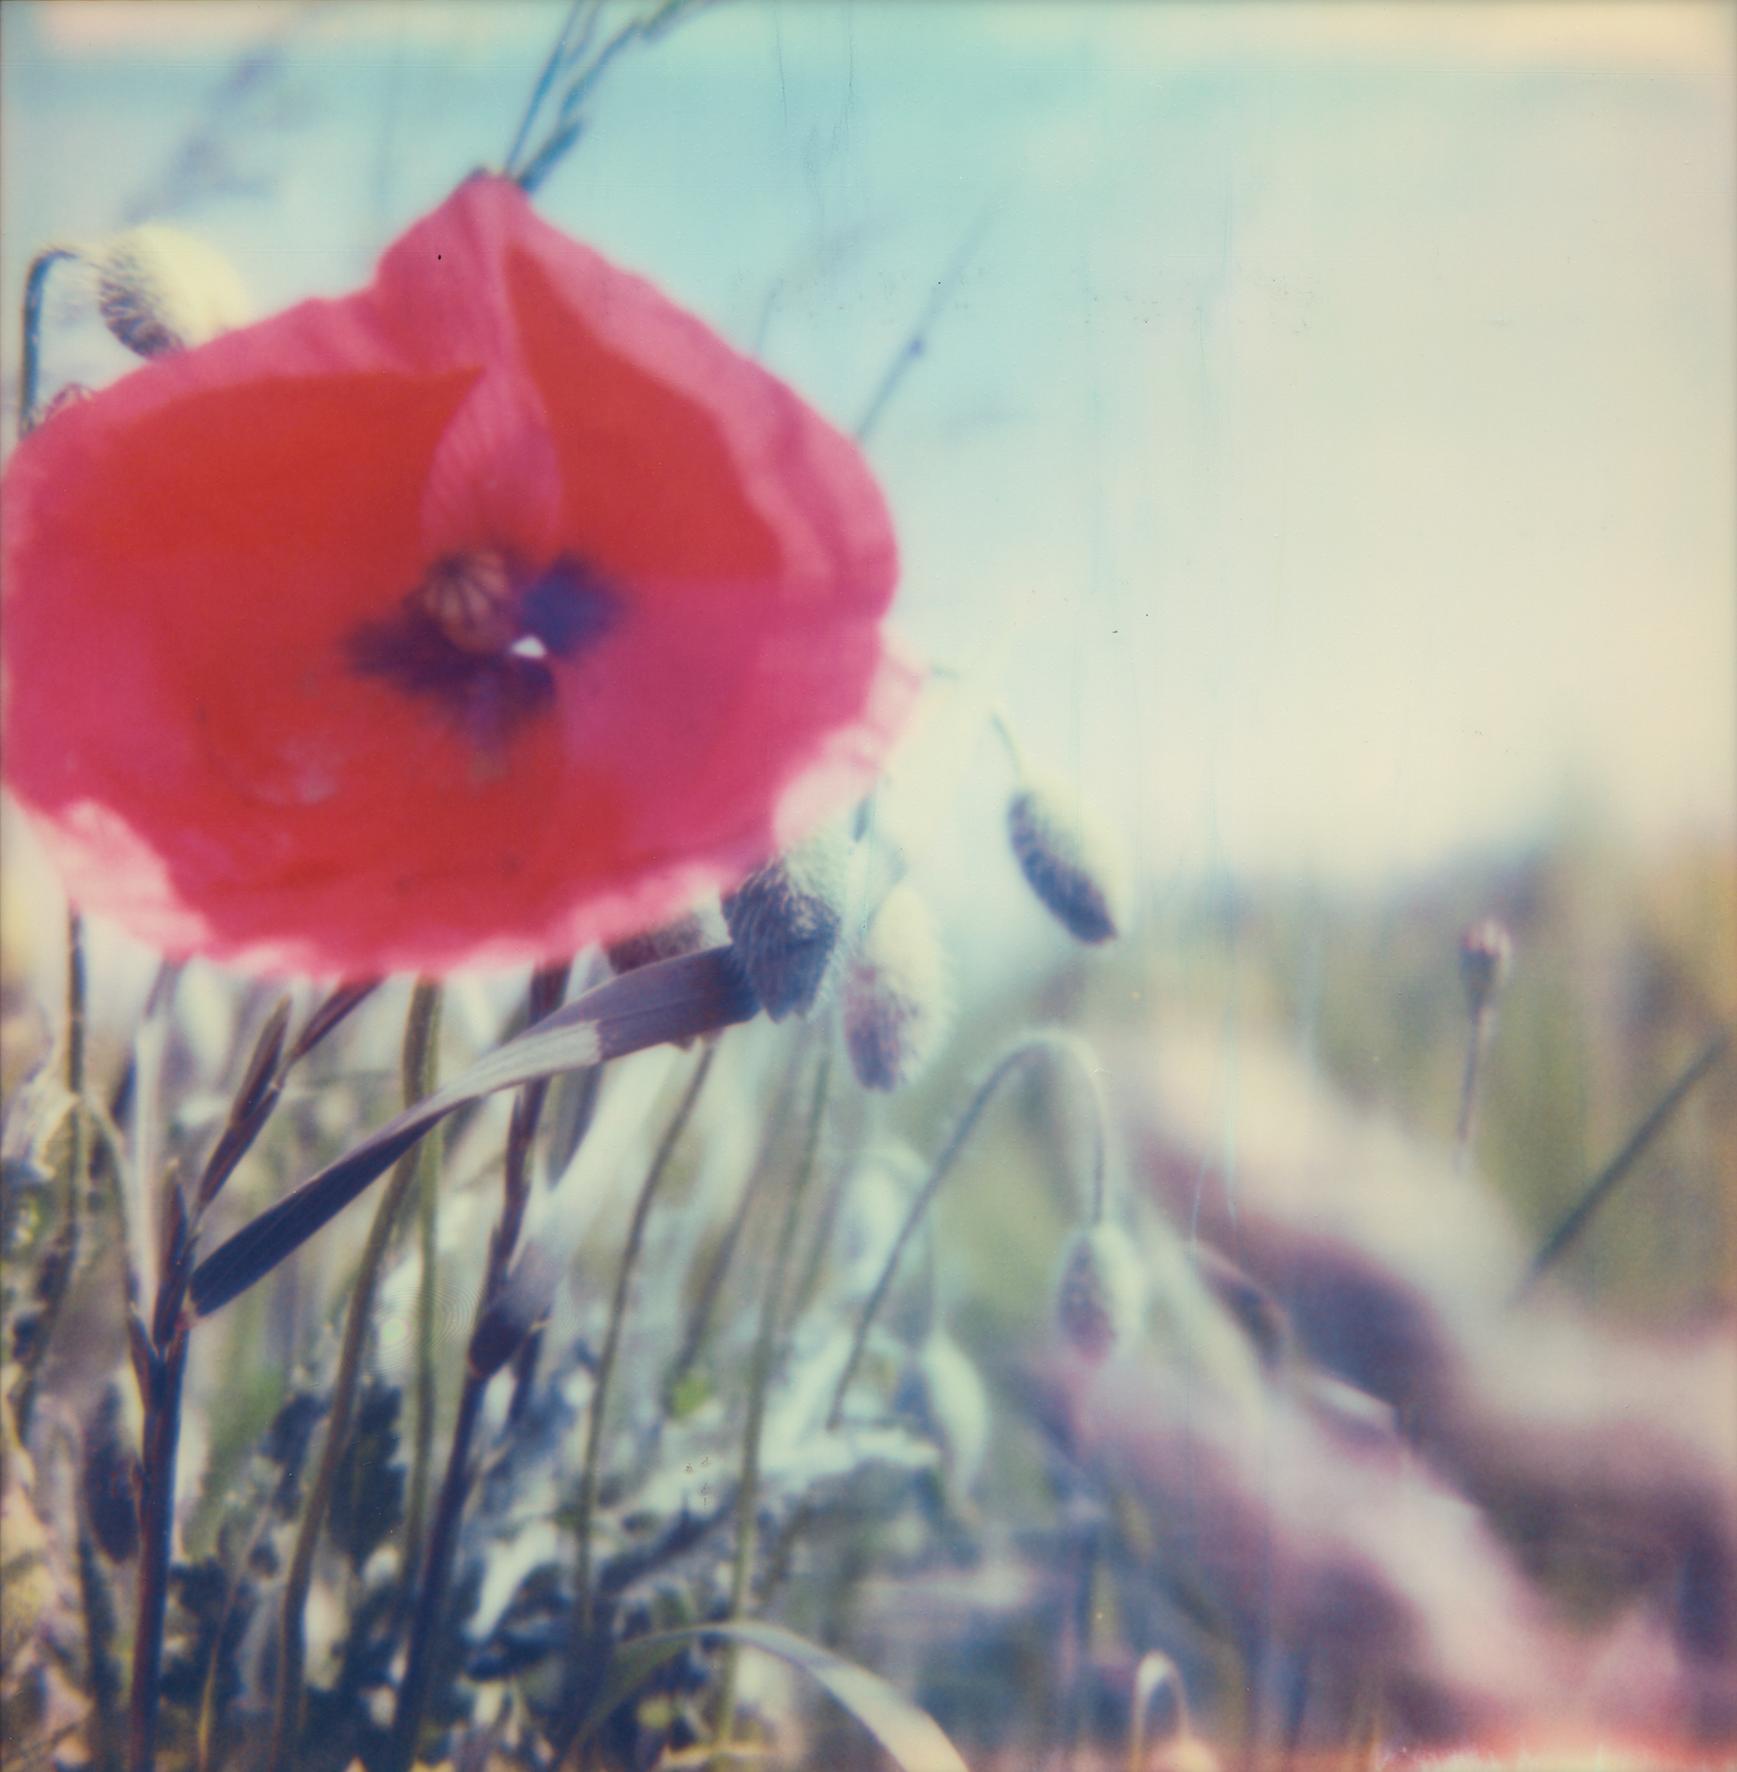 Carmen de Vos Landscape Photograph - Poppy Realm #03 [From the series Wild Things]